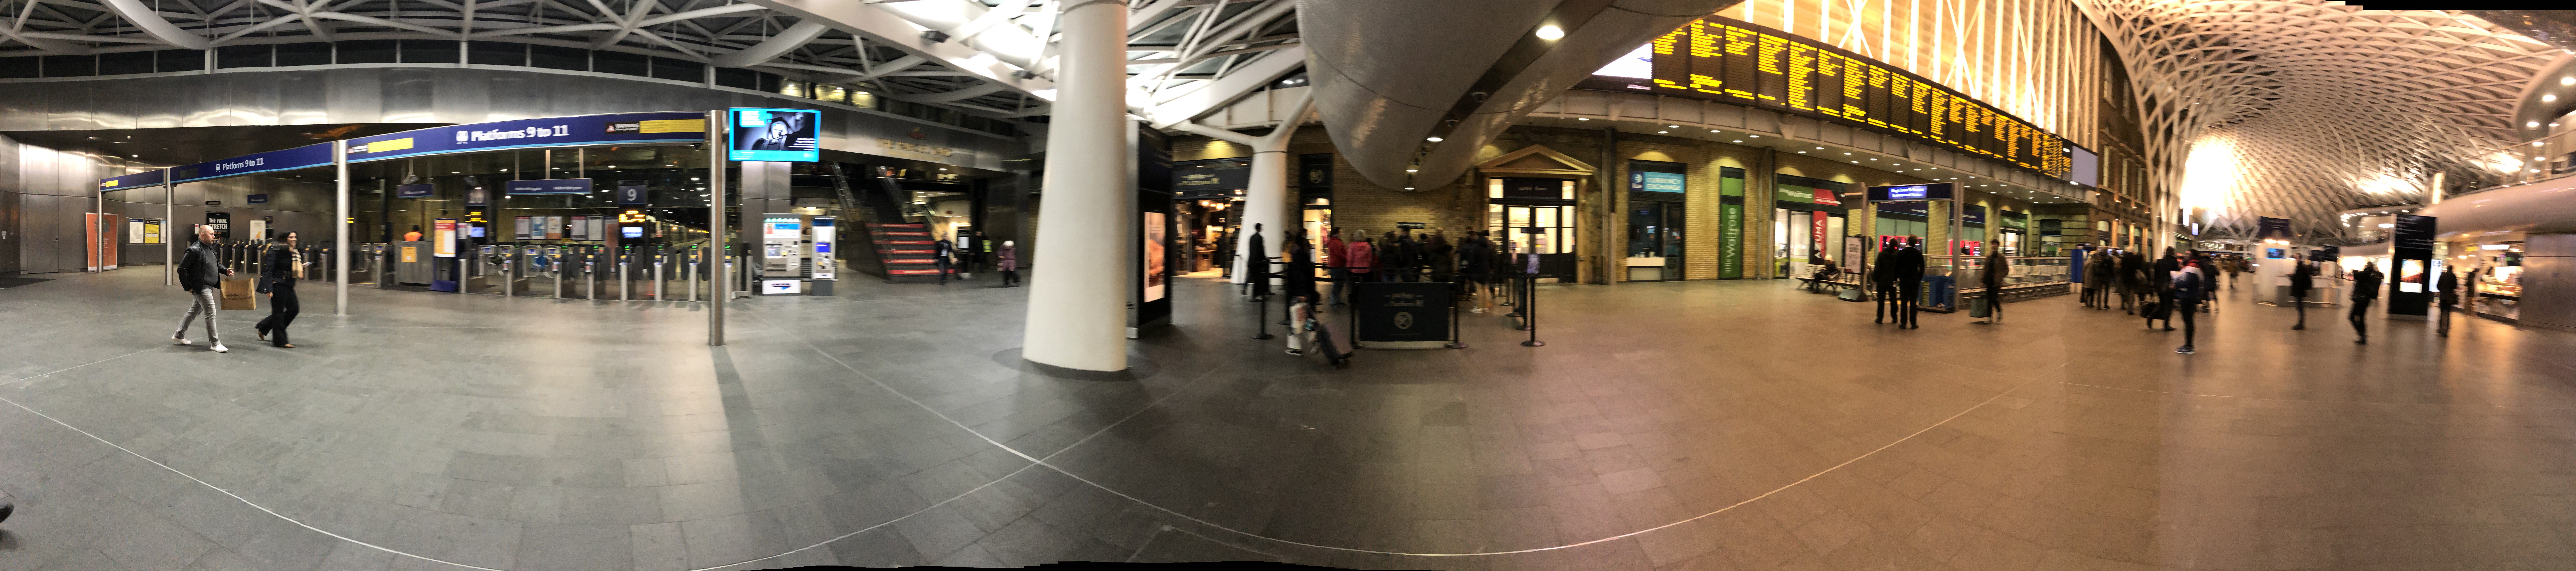 Fish eye view of Paddington station, panoramic, mostly empty station outside platforms 9-11 on the left, a crowd outside a brick wall, then train information boards to the right, with no crowds